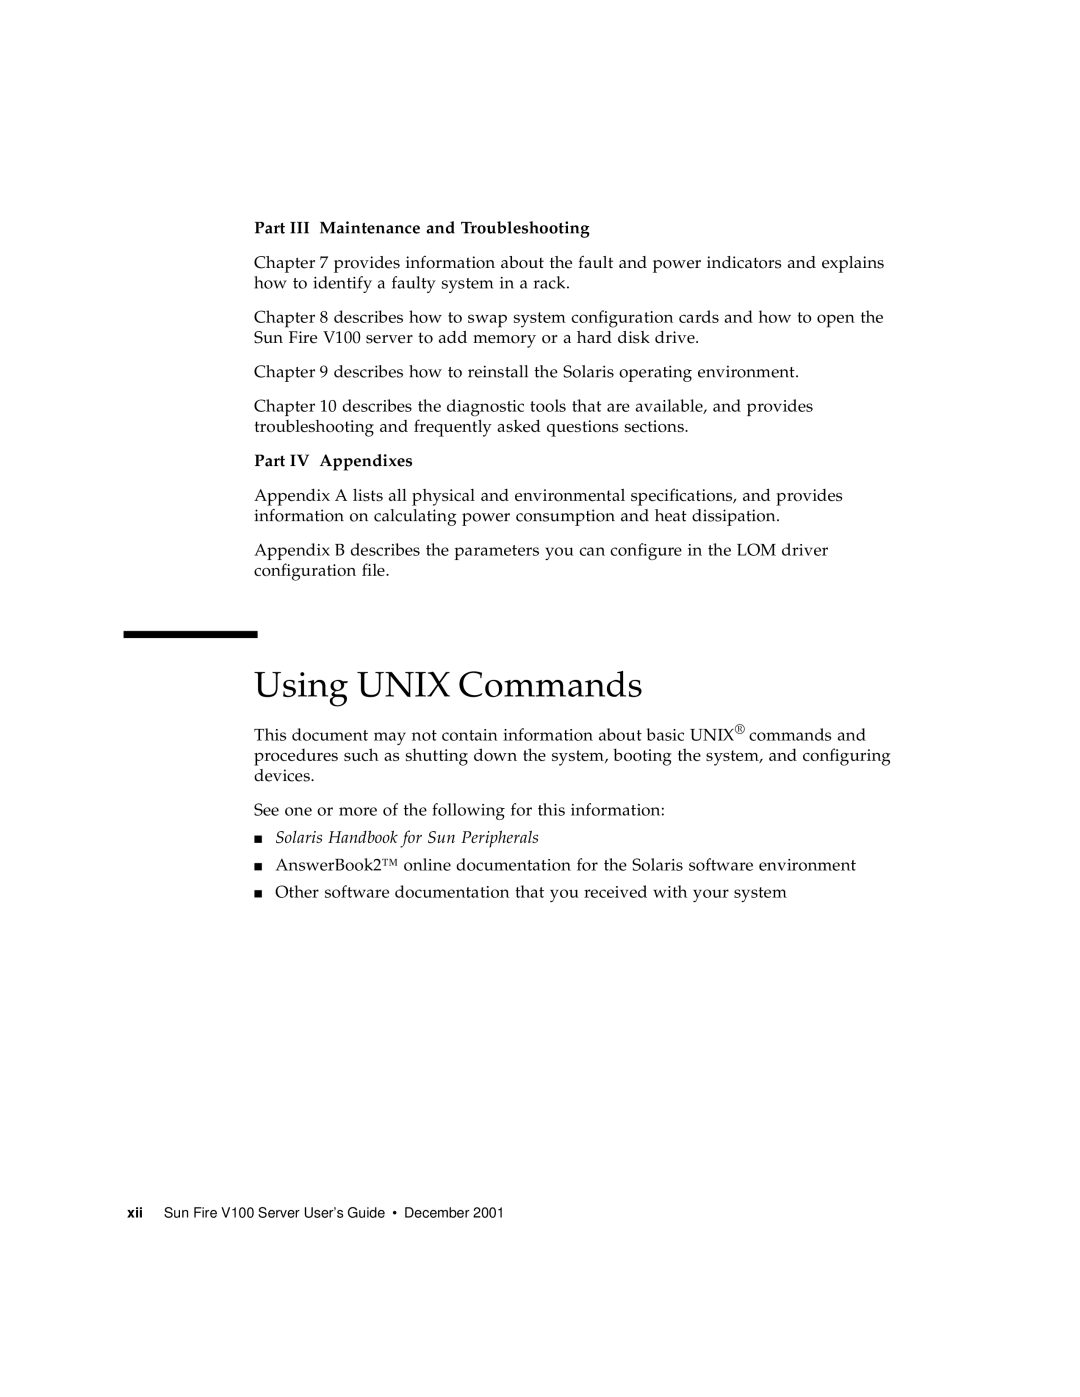 Sun Microsystems Sun Fire V100 manual Using UNIX Commands, Part III Maintenance and Troubleshooting, Part IV Appendixes 